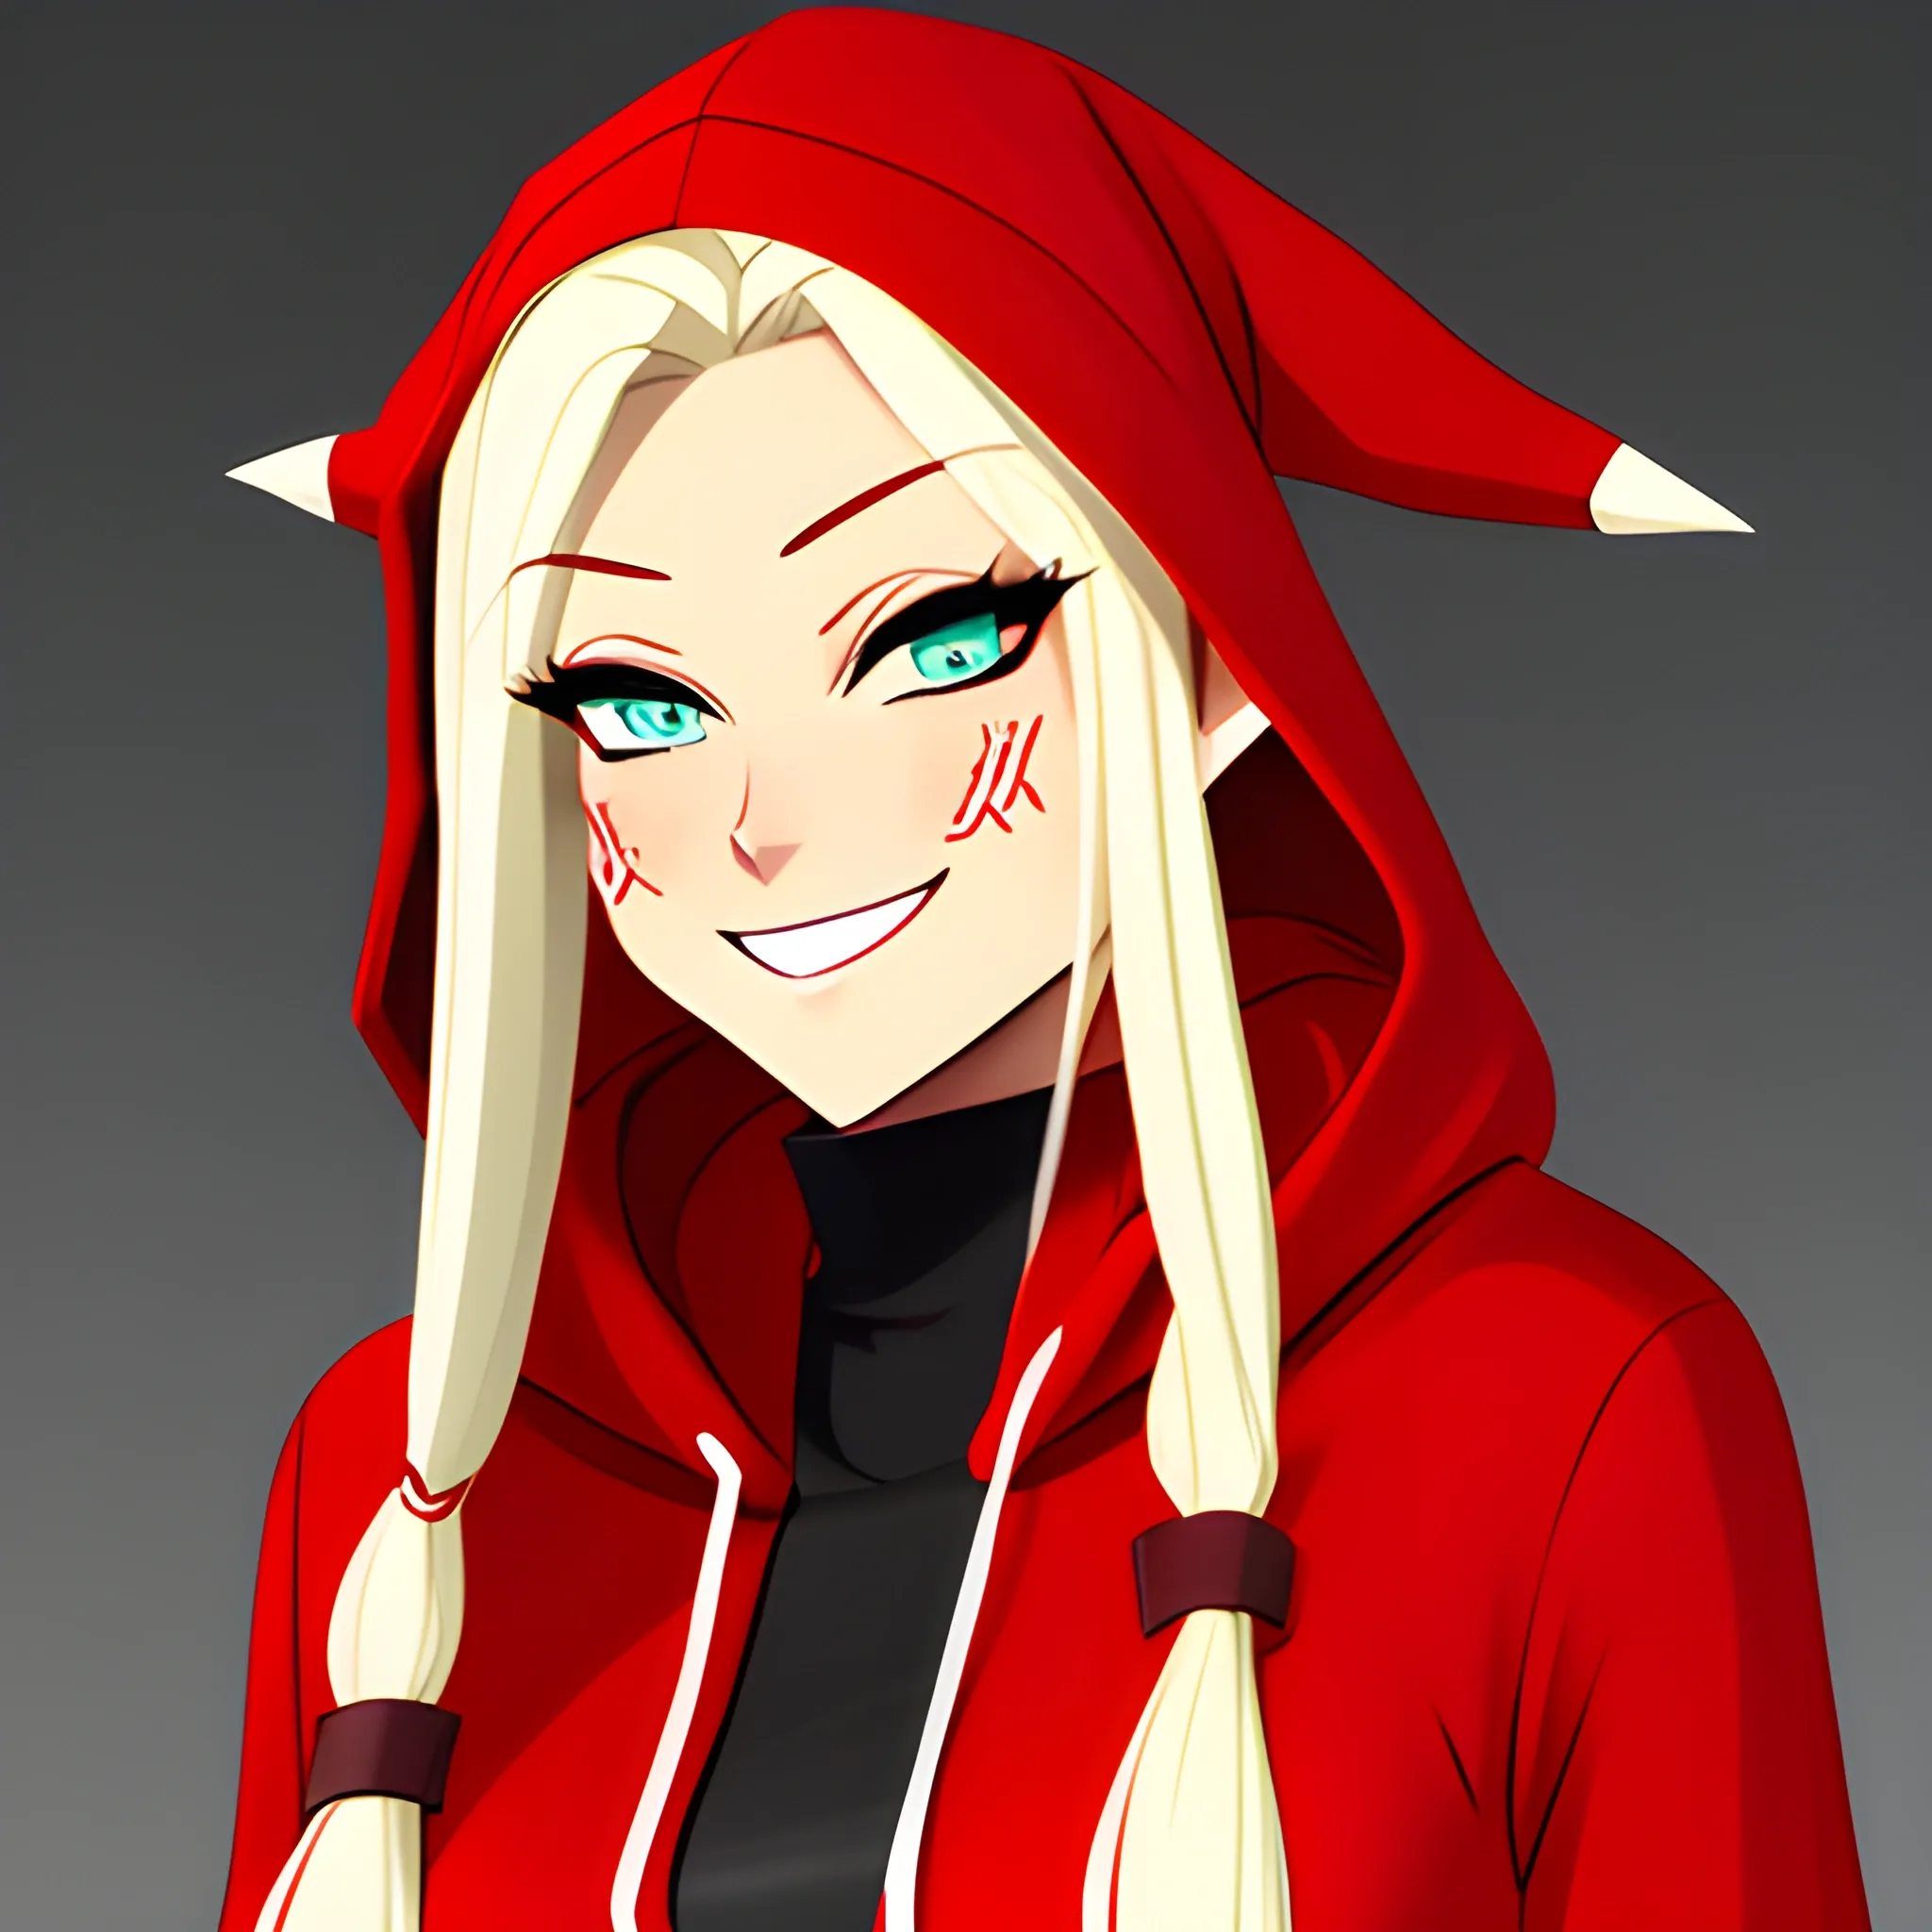  have elf ears,girl,double ponytail hair,red hat and hooded clothes and red schoolbag,happy expression, Cartoon, Cartoon,very cute,blond hair,kid,red eye,